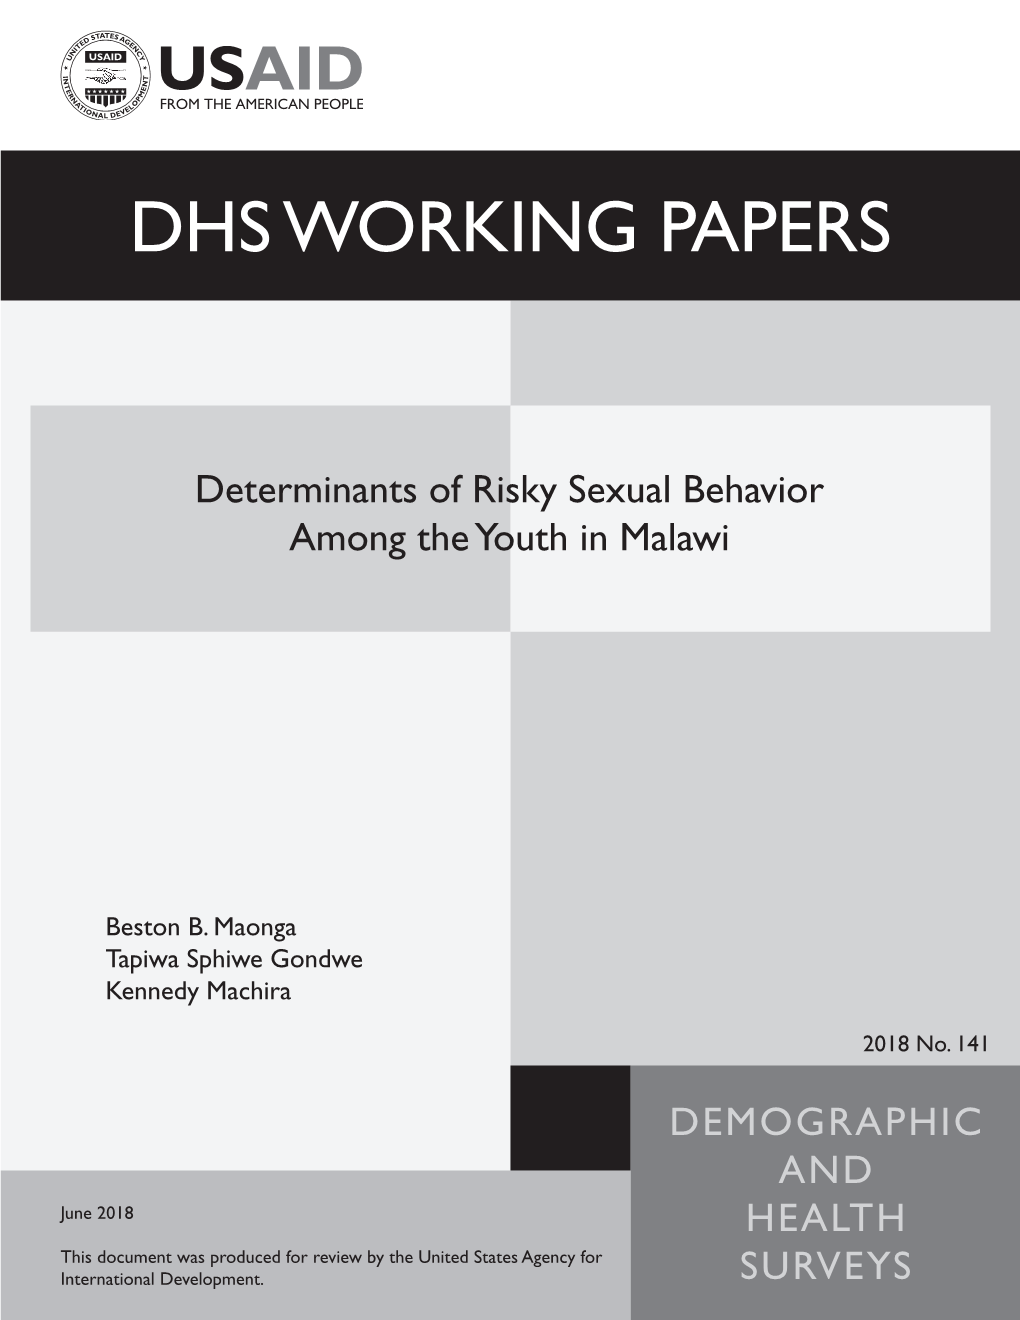 Determinants of Risky Sexual Behavior Among the Youth in Malawi